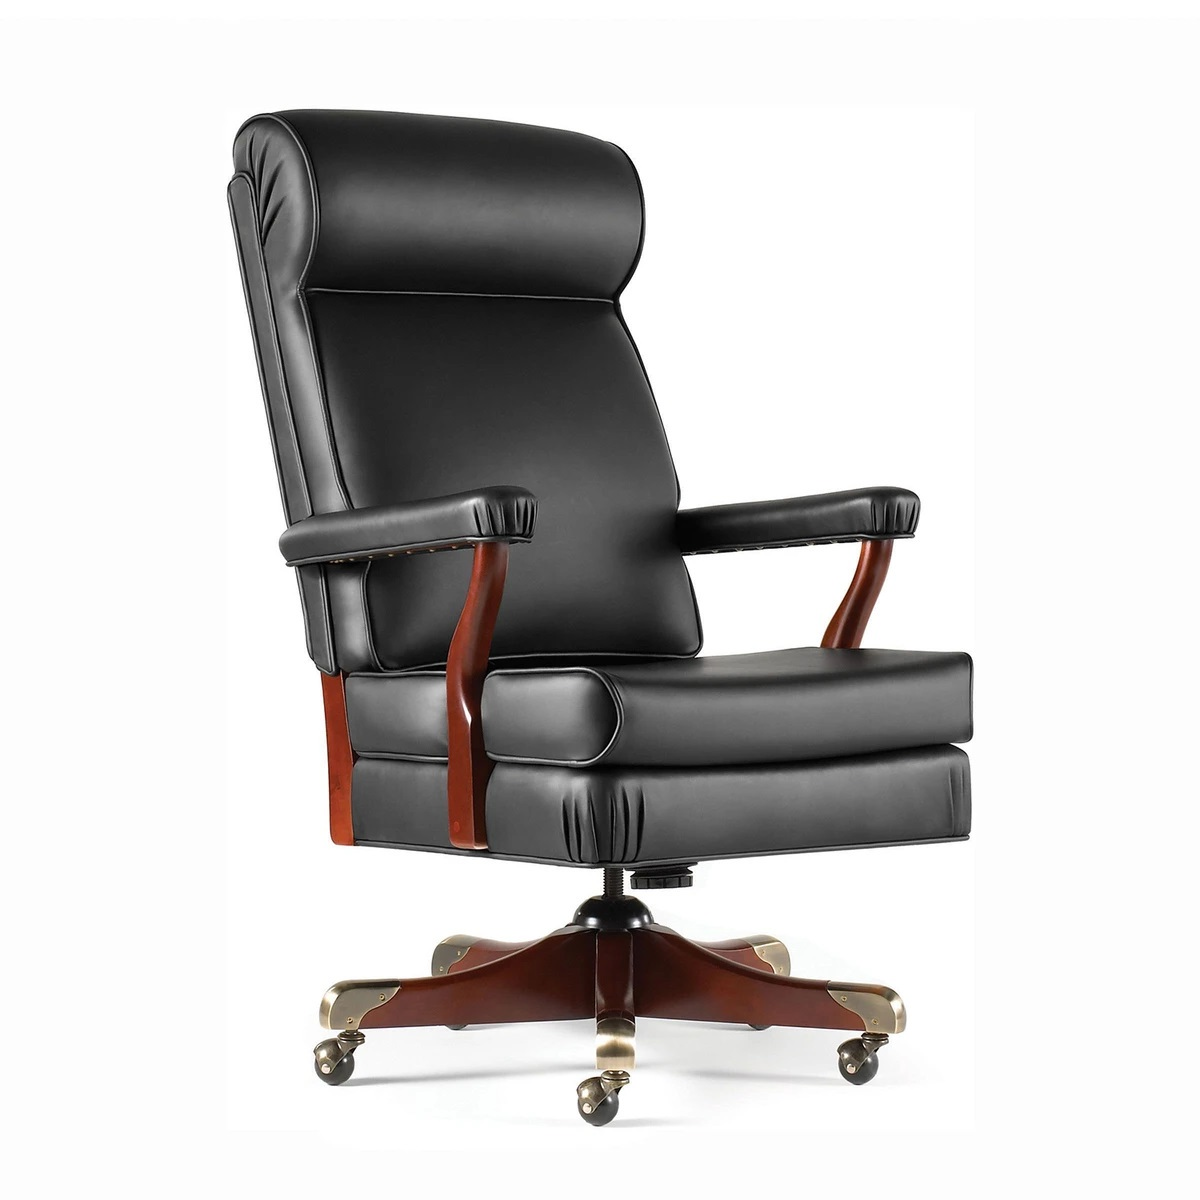 Priced To 1,4 M, This Are Top 5 Most Expensive Computer Chair Ever Exist | Roy Home Design